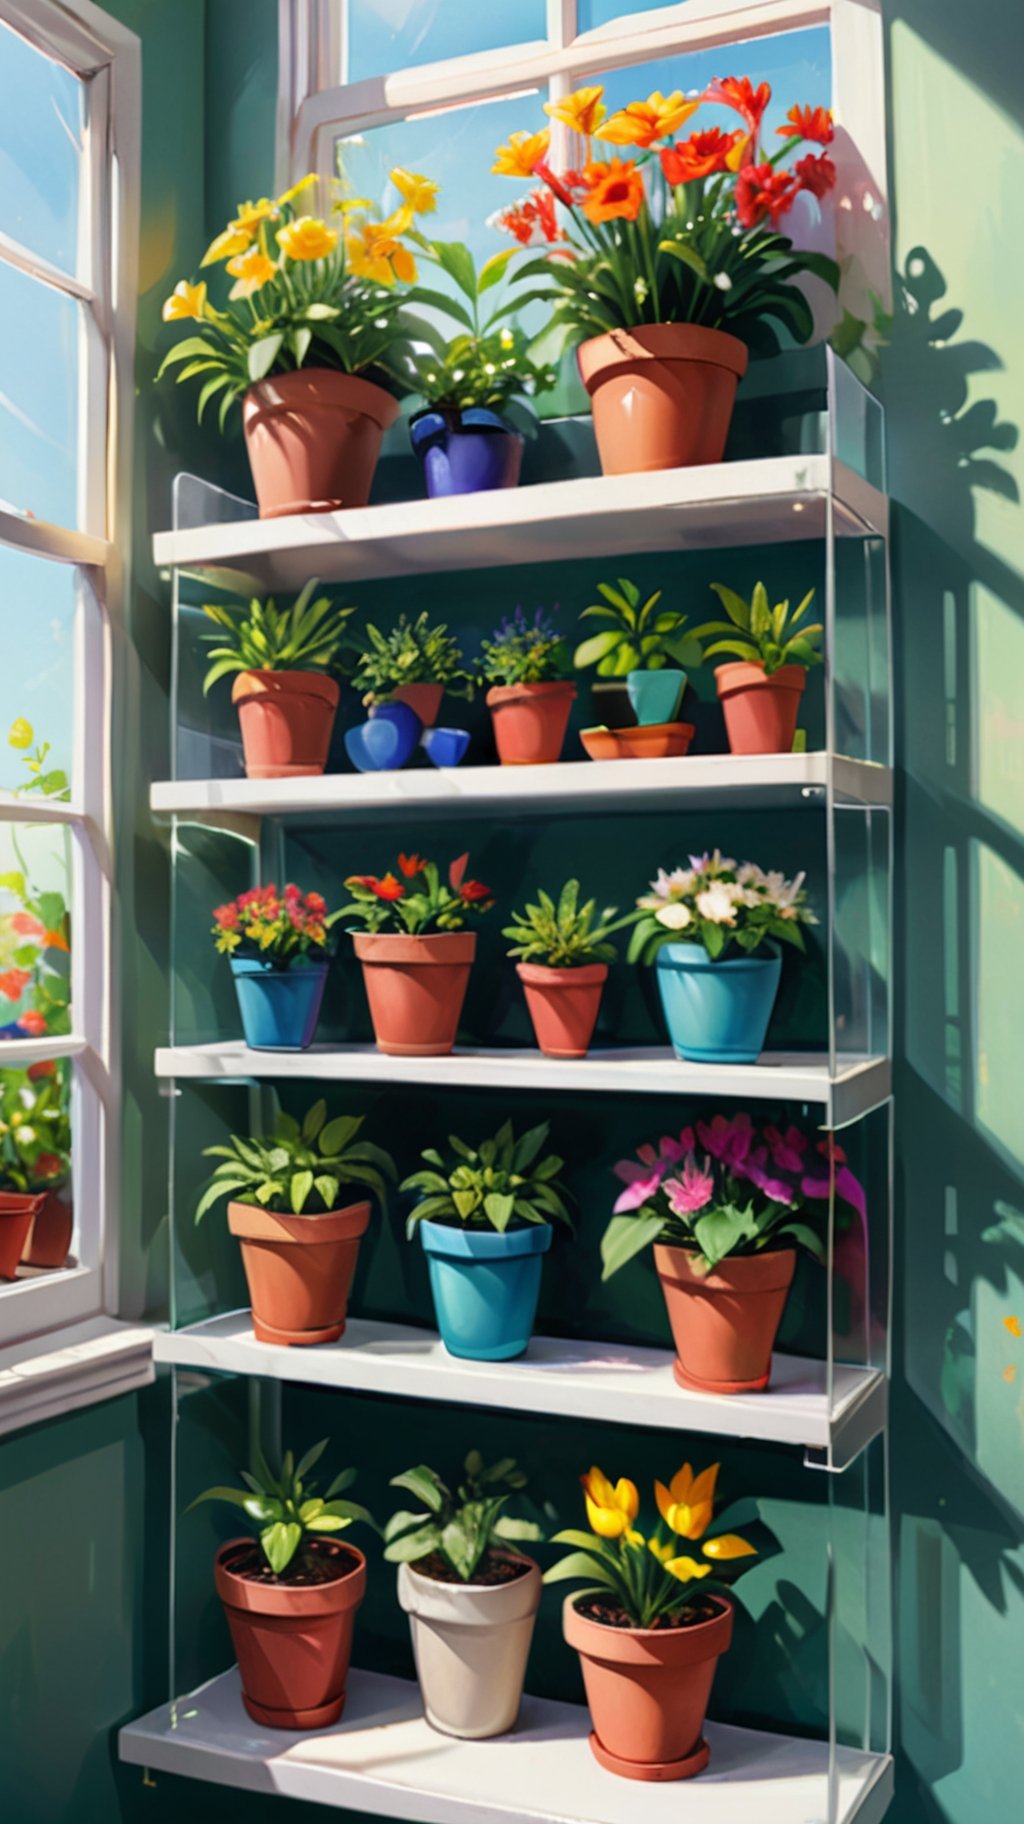 Acrylic illustration of shelf filled with potted flowers and other plants near a sunny window, vibrant colors, highly detailed.